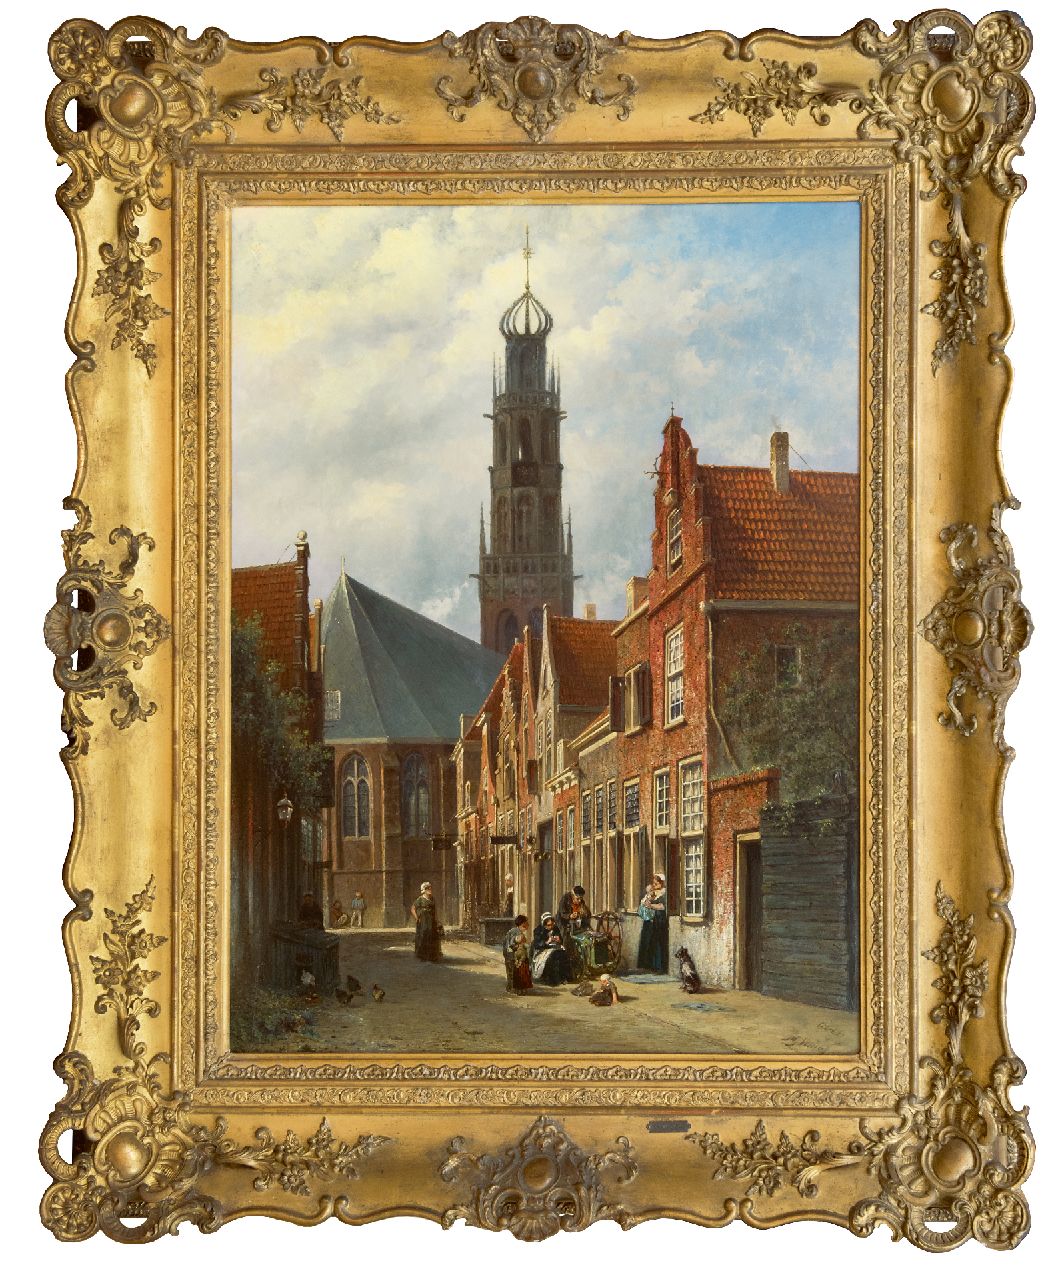 Vertin P.G.  | Petrus Gerardus Vertin | Paintings offered for sale | A view of Haarlem with the Bakenesser church, oil on panel 85.3 x 64.9 cm, signed l.r. (both) and painted 1877-1878